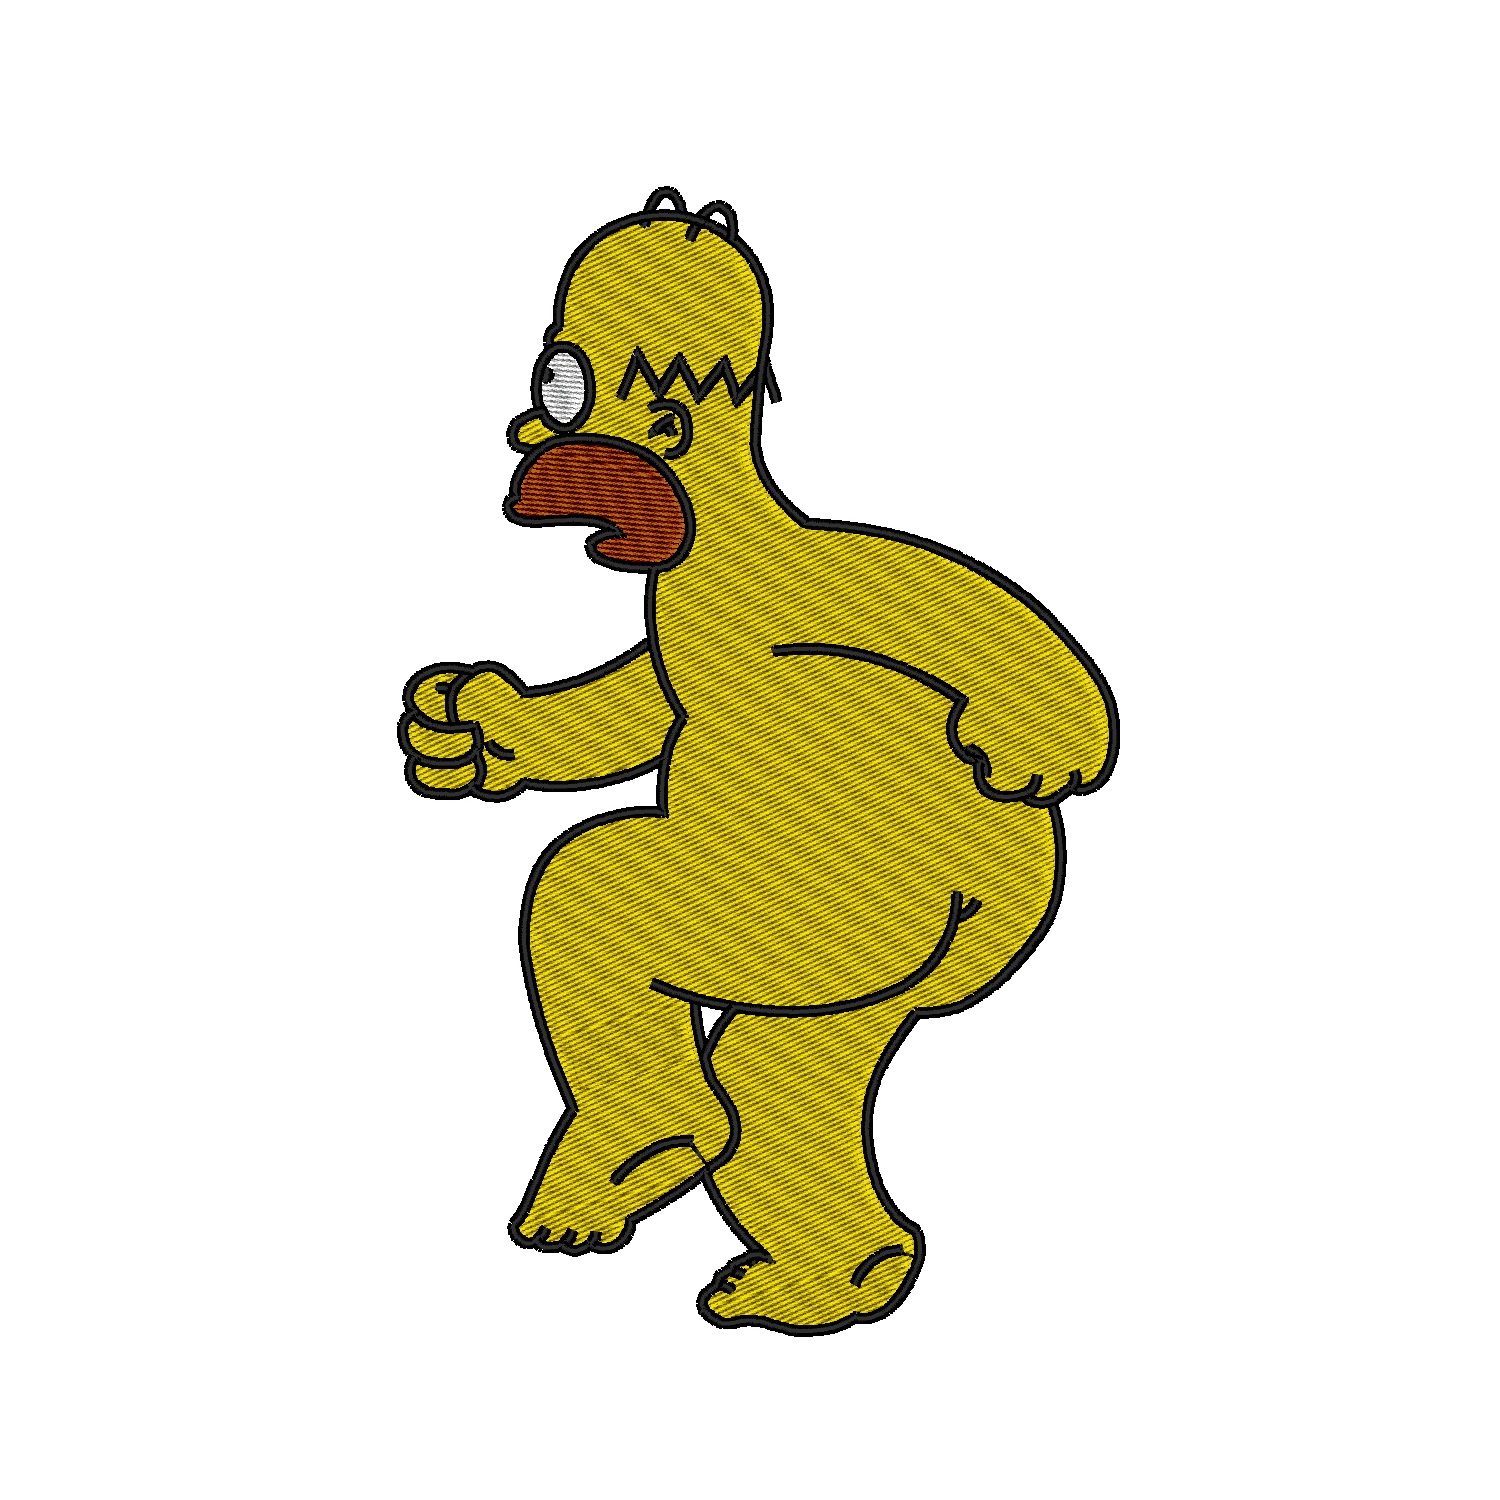 ashish goradia recommends homer simpson naked pic